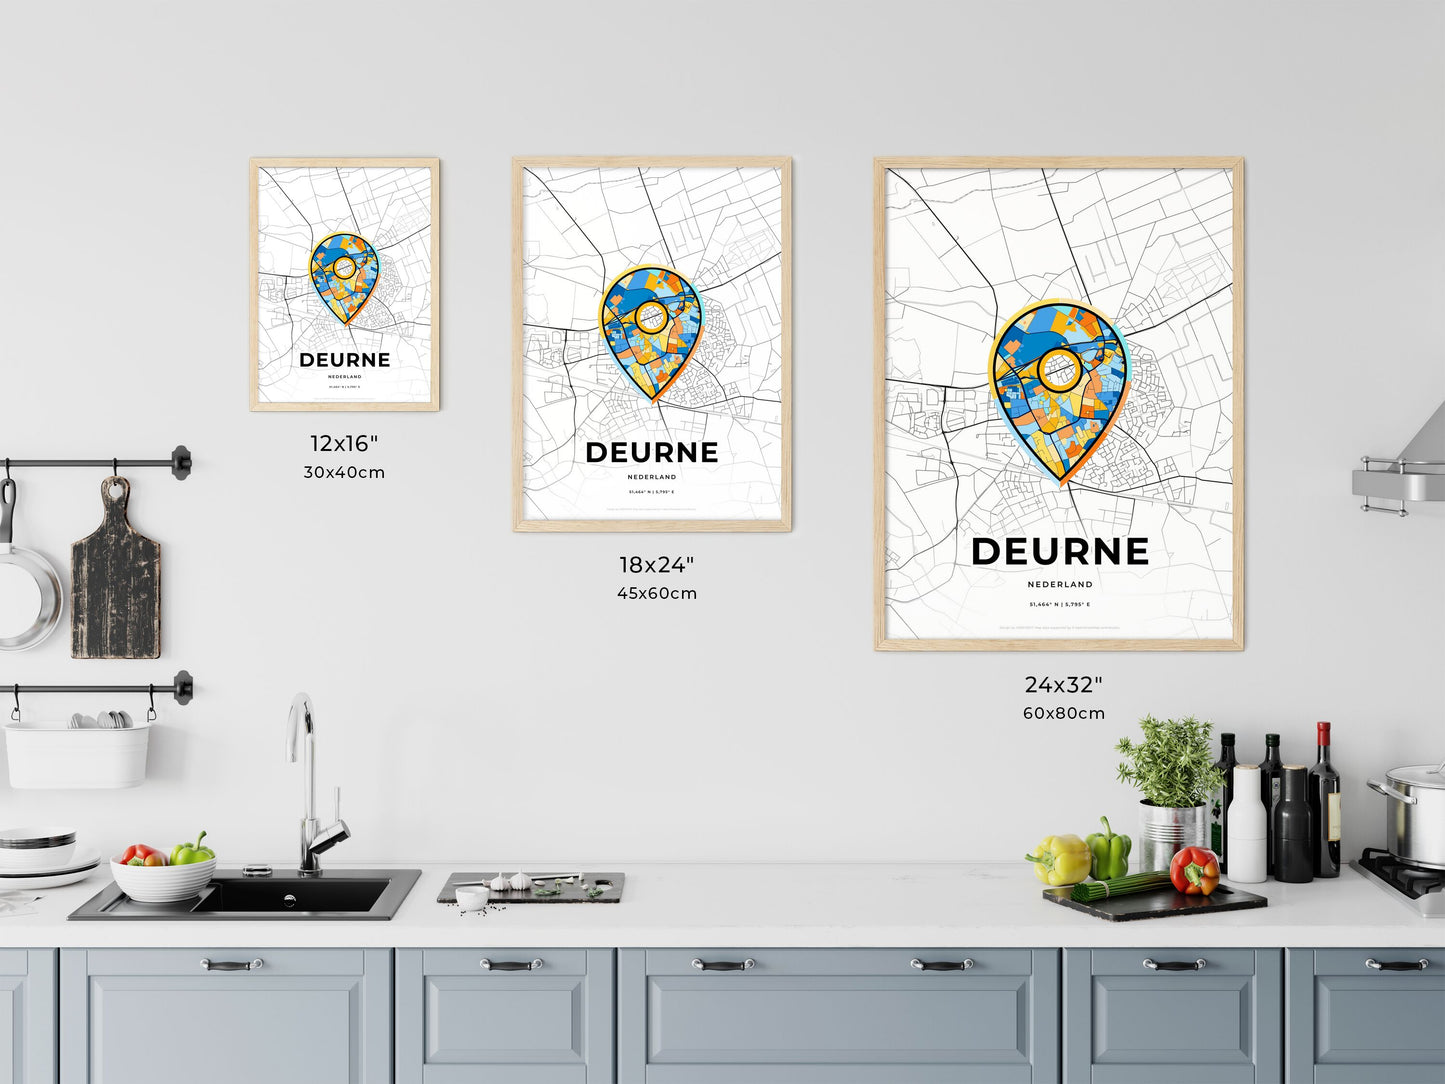 DEURNE NETHERLANDS minimal art map with a colorful icon. Where it all began, Couple map gift.